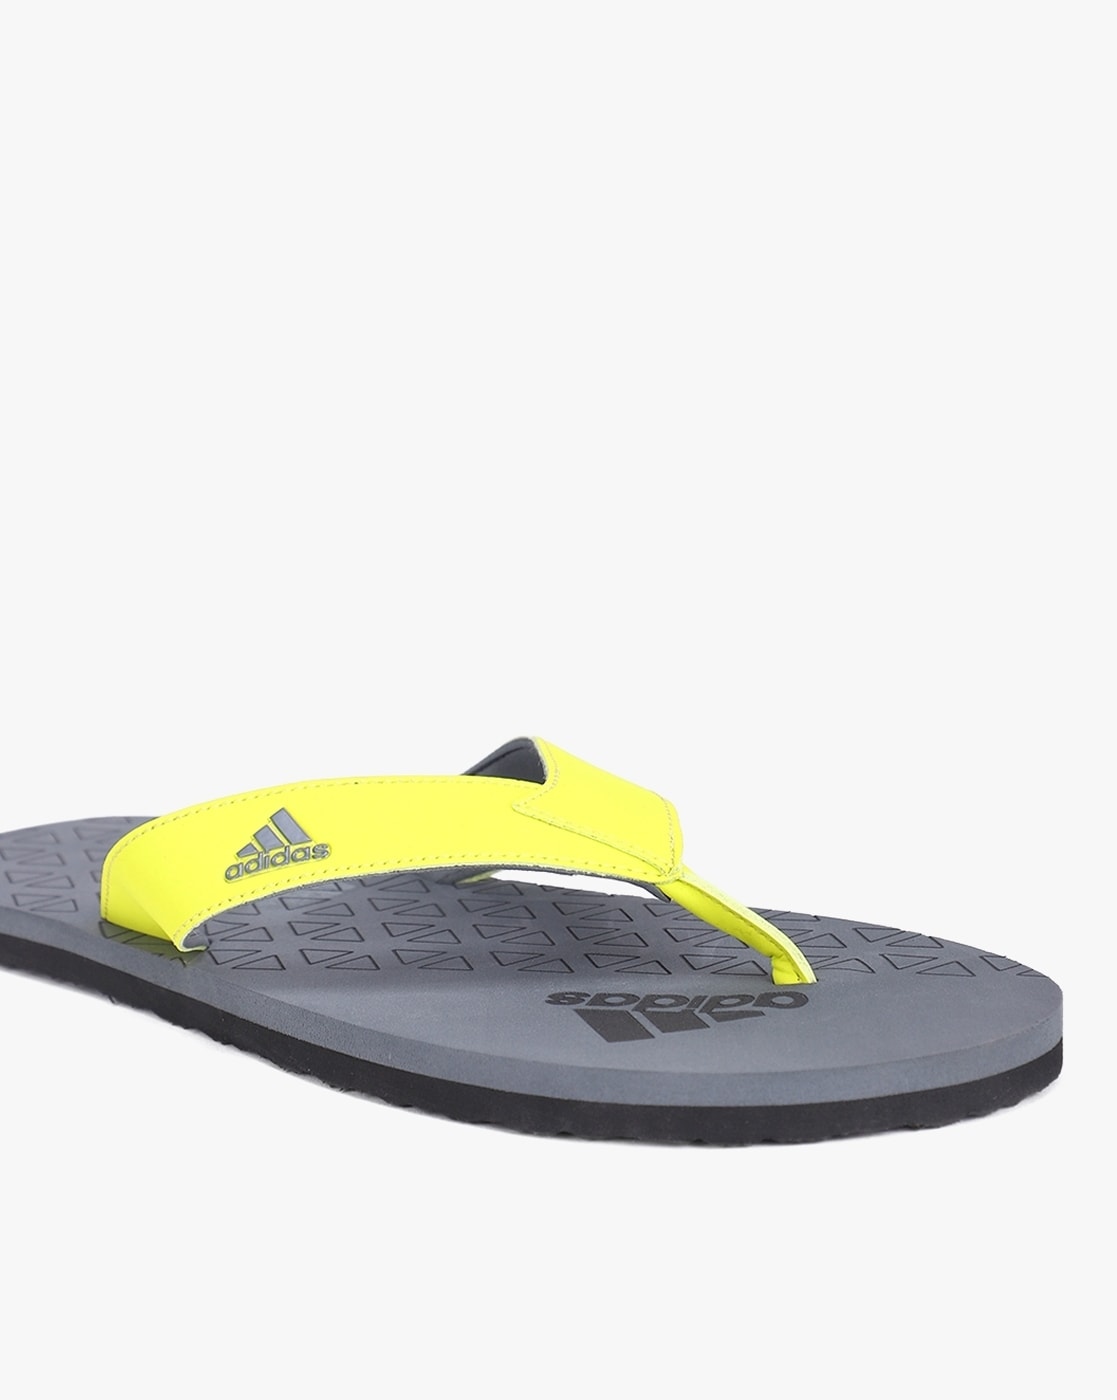 Details more than 160 adidas ozor slippers